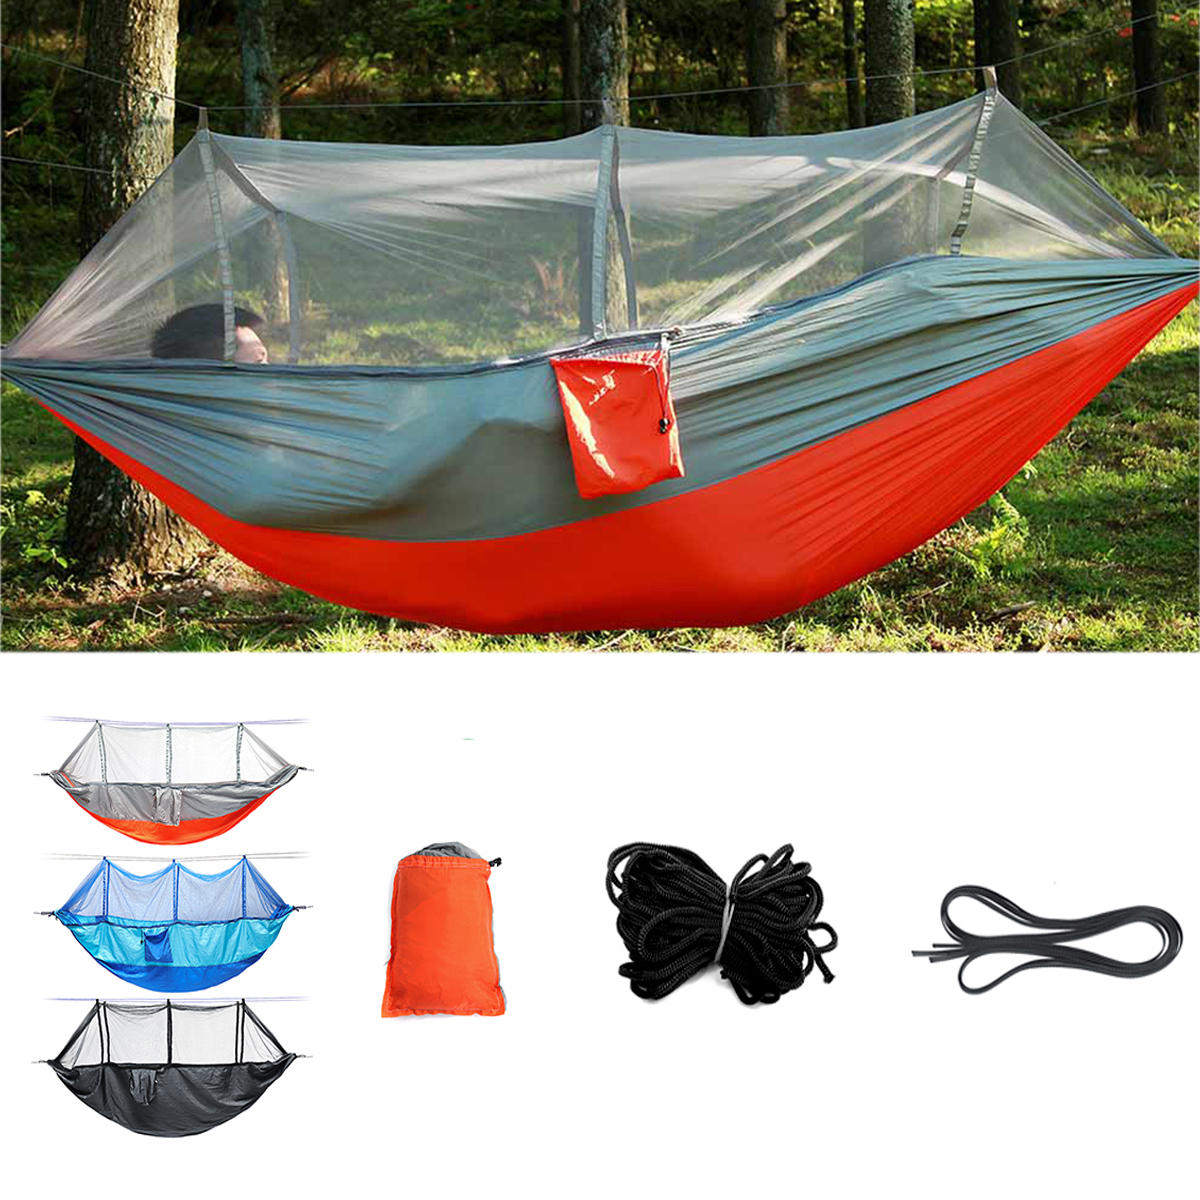 Outdoor Double 2 People Hammock Camping Tent Hanging Swing Bed With Mosquito Net